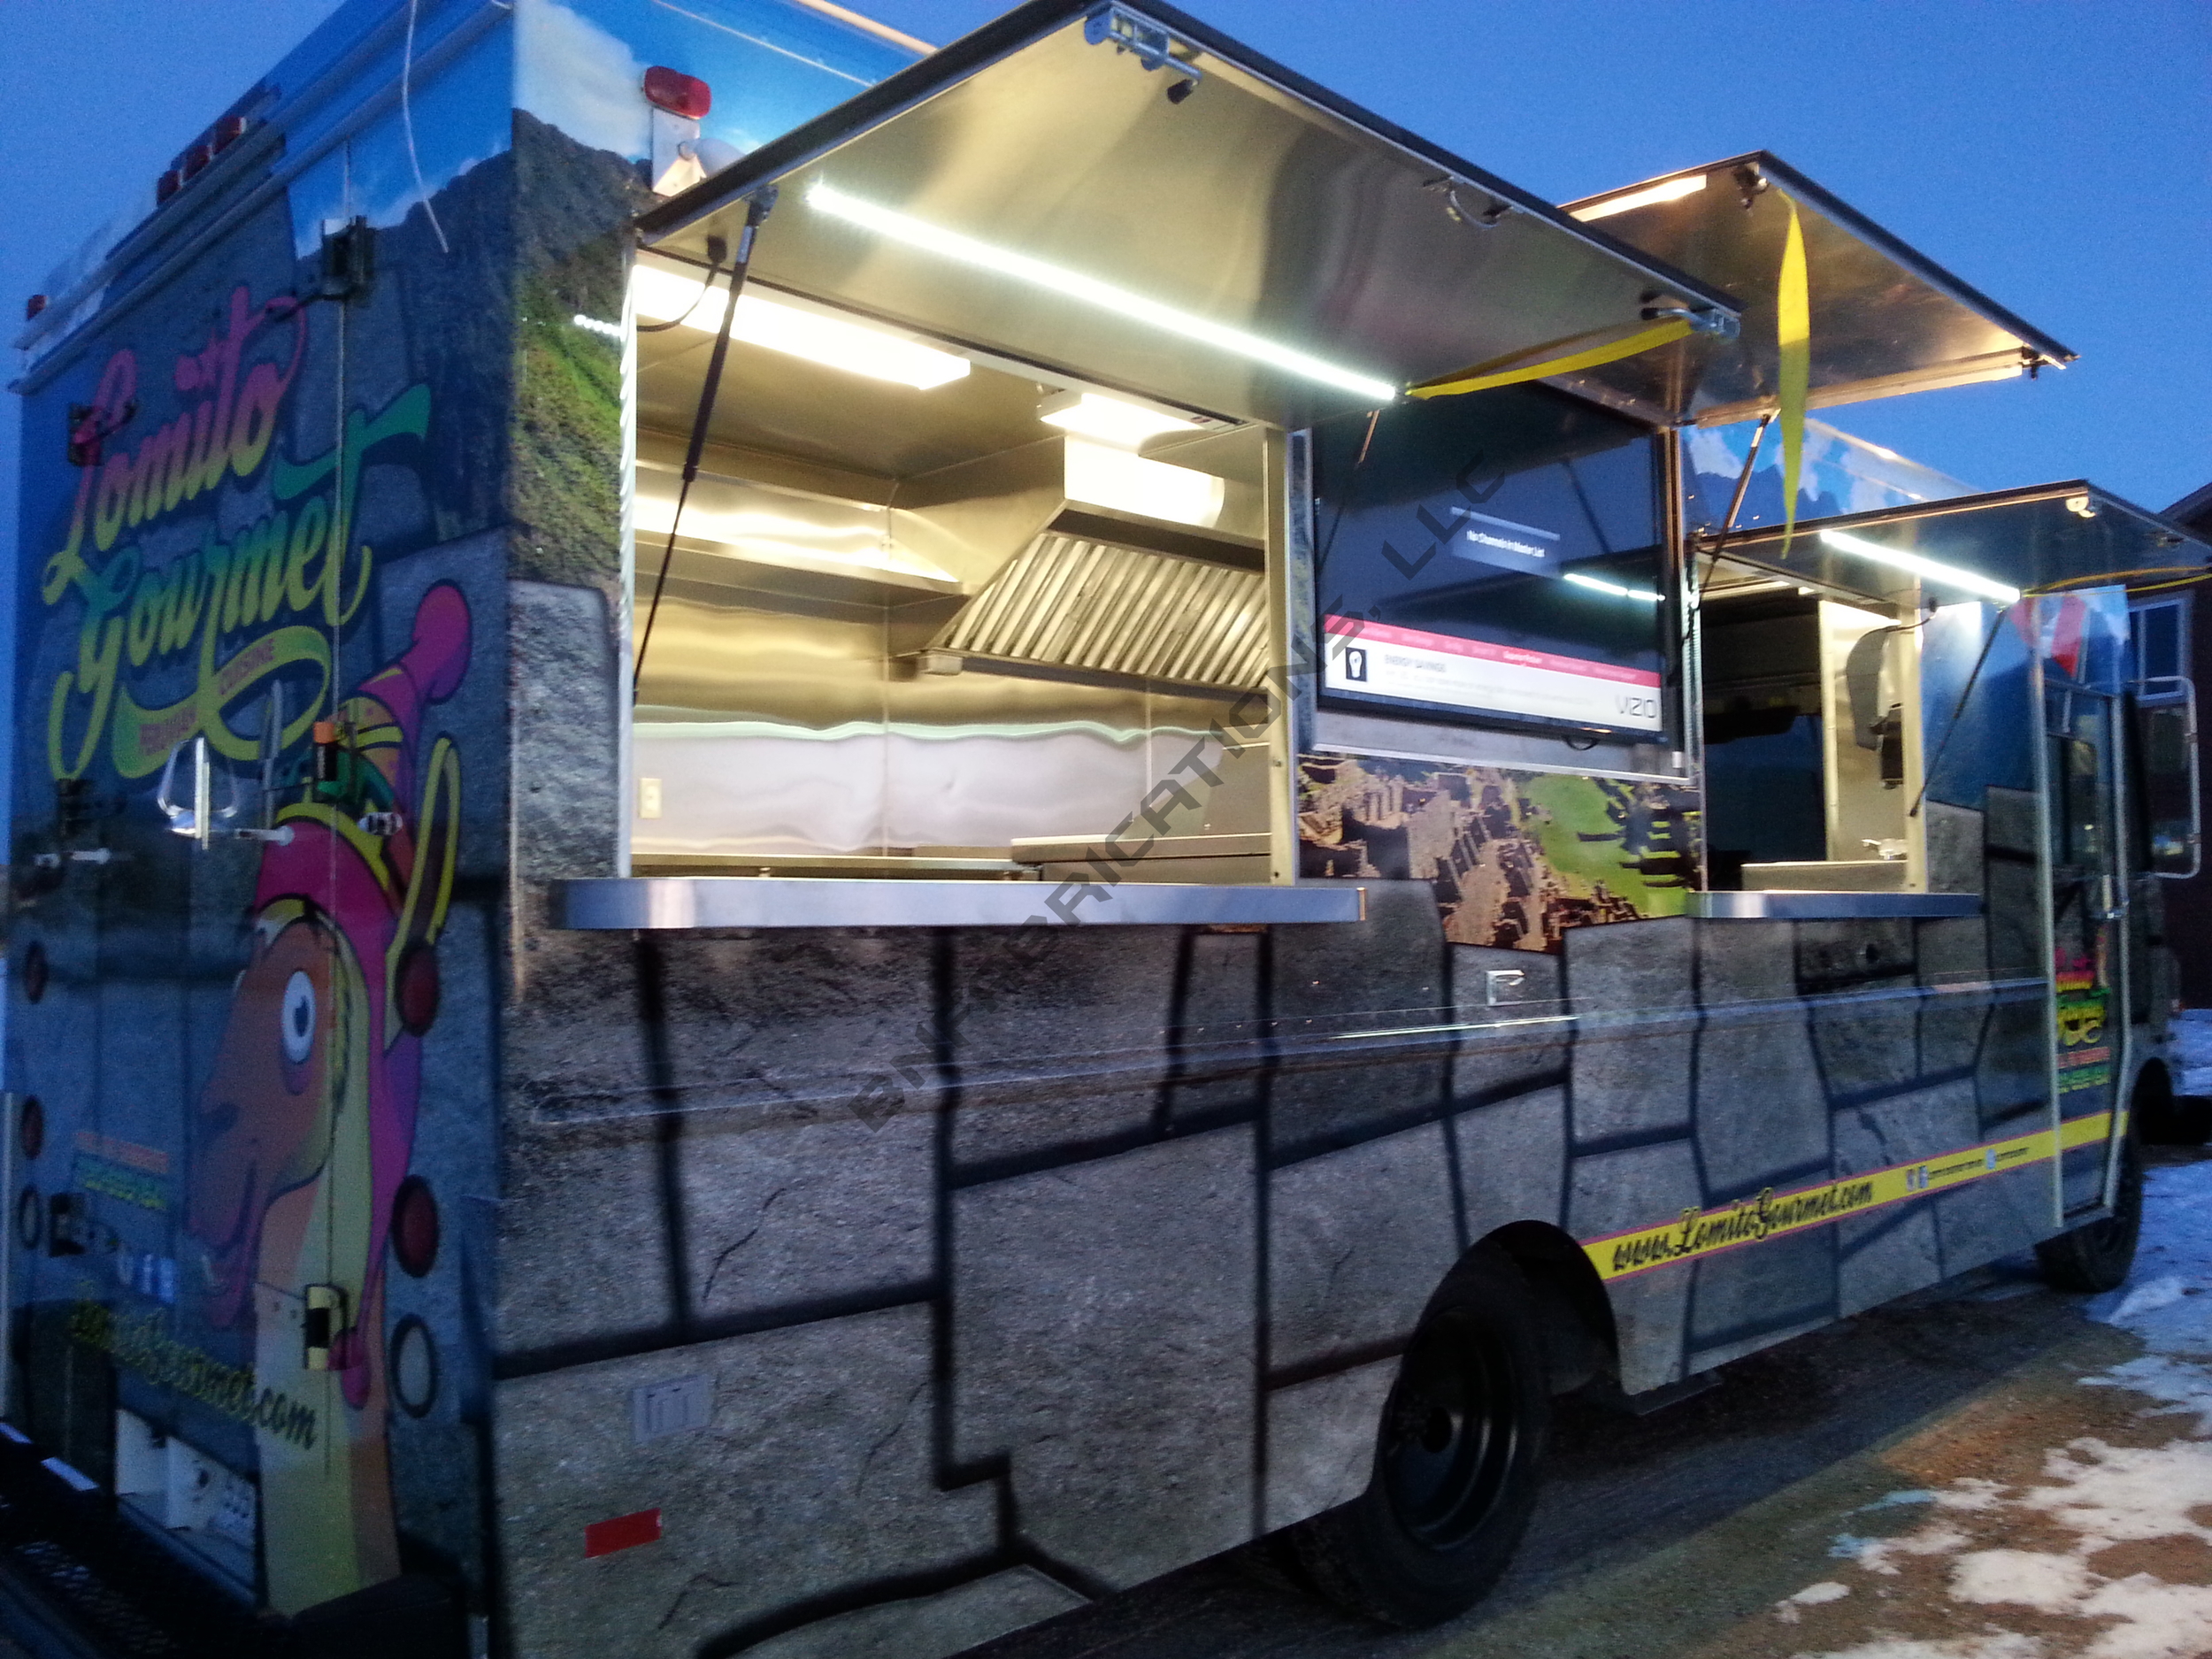 Lomito's food truck serving window and TV awnings